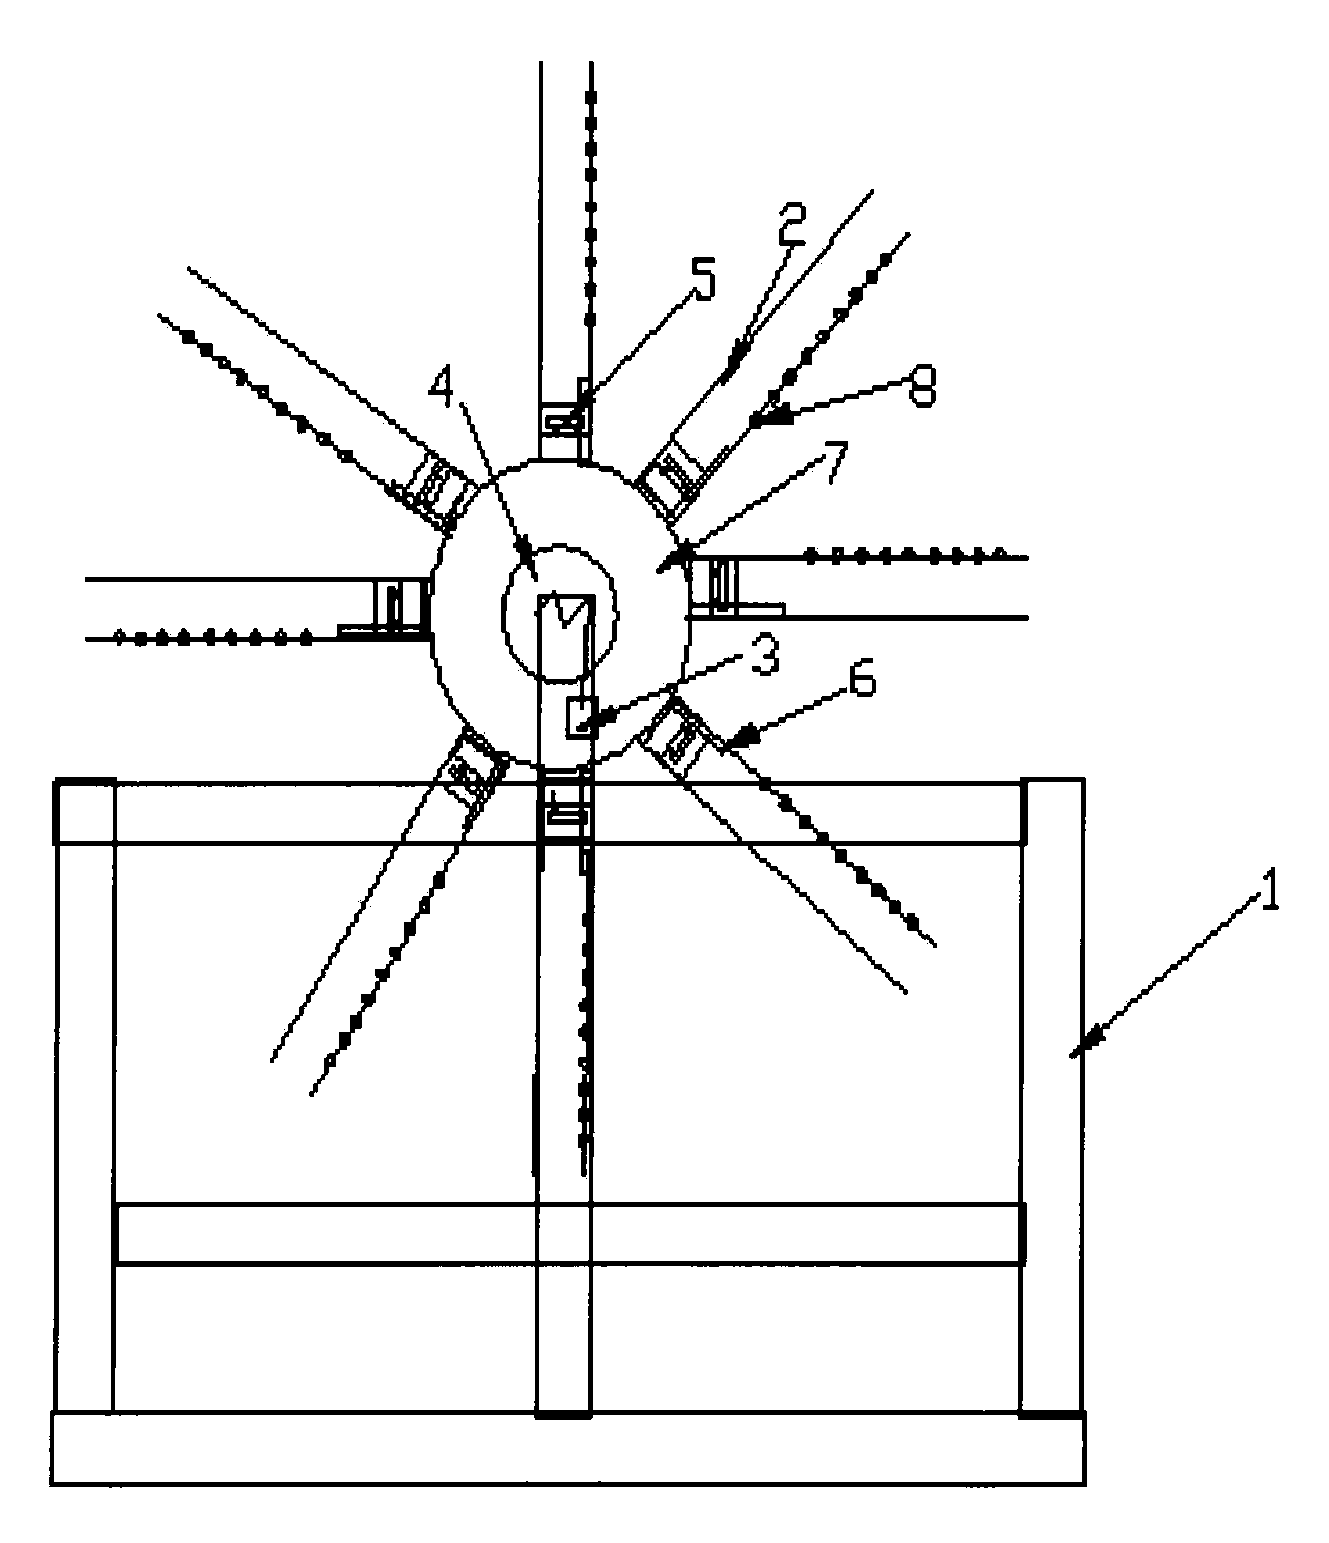 Turning buffering mechanism for photovoltaic module flexible manufacturing system